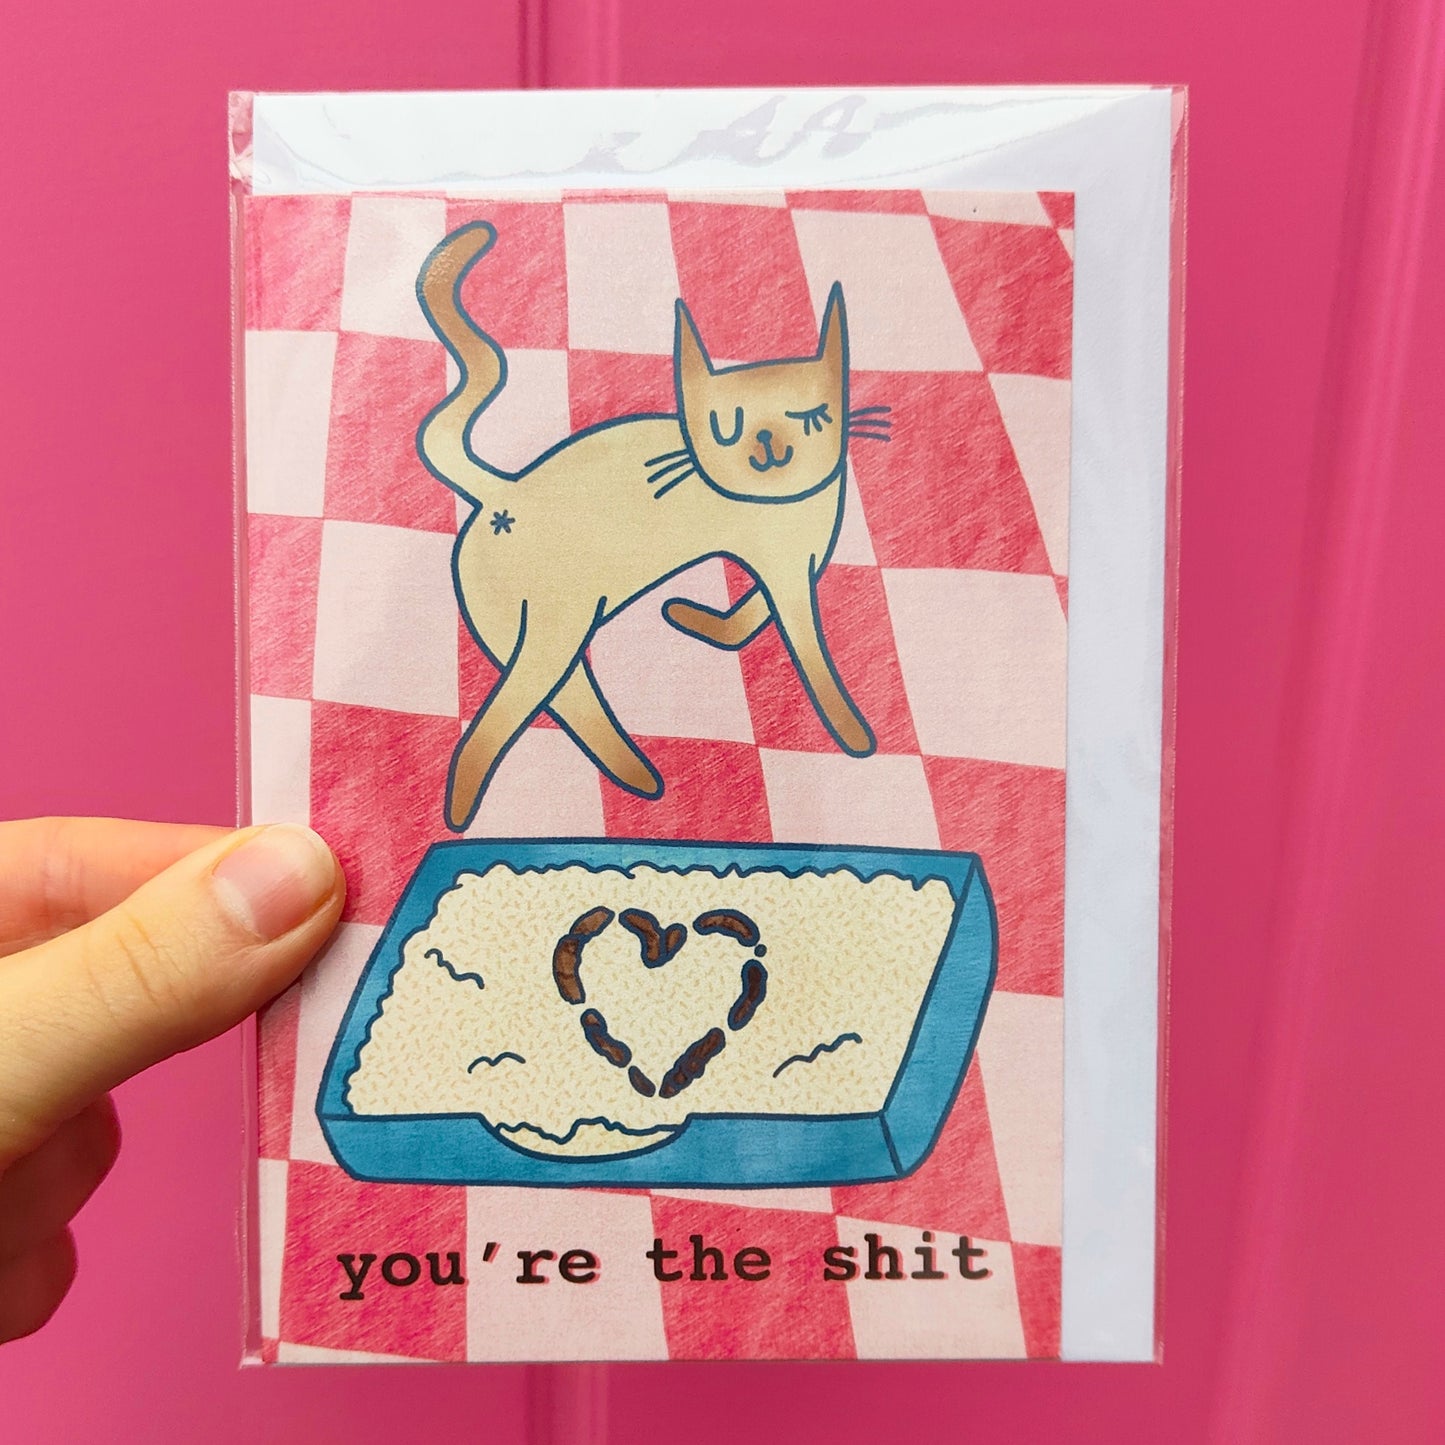 You’re The Sh!t- Cat Poop Valentines Day Card - Greetings Card